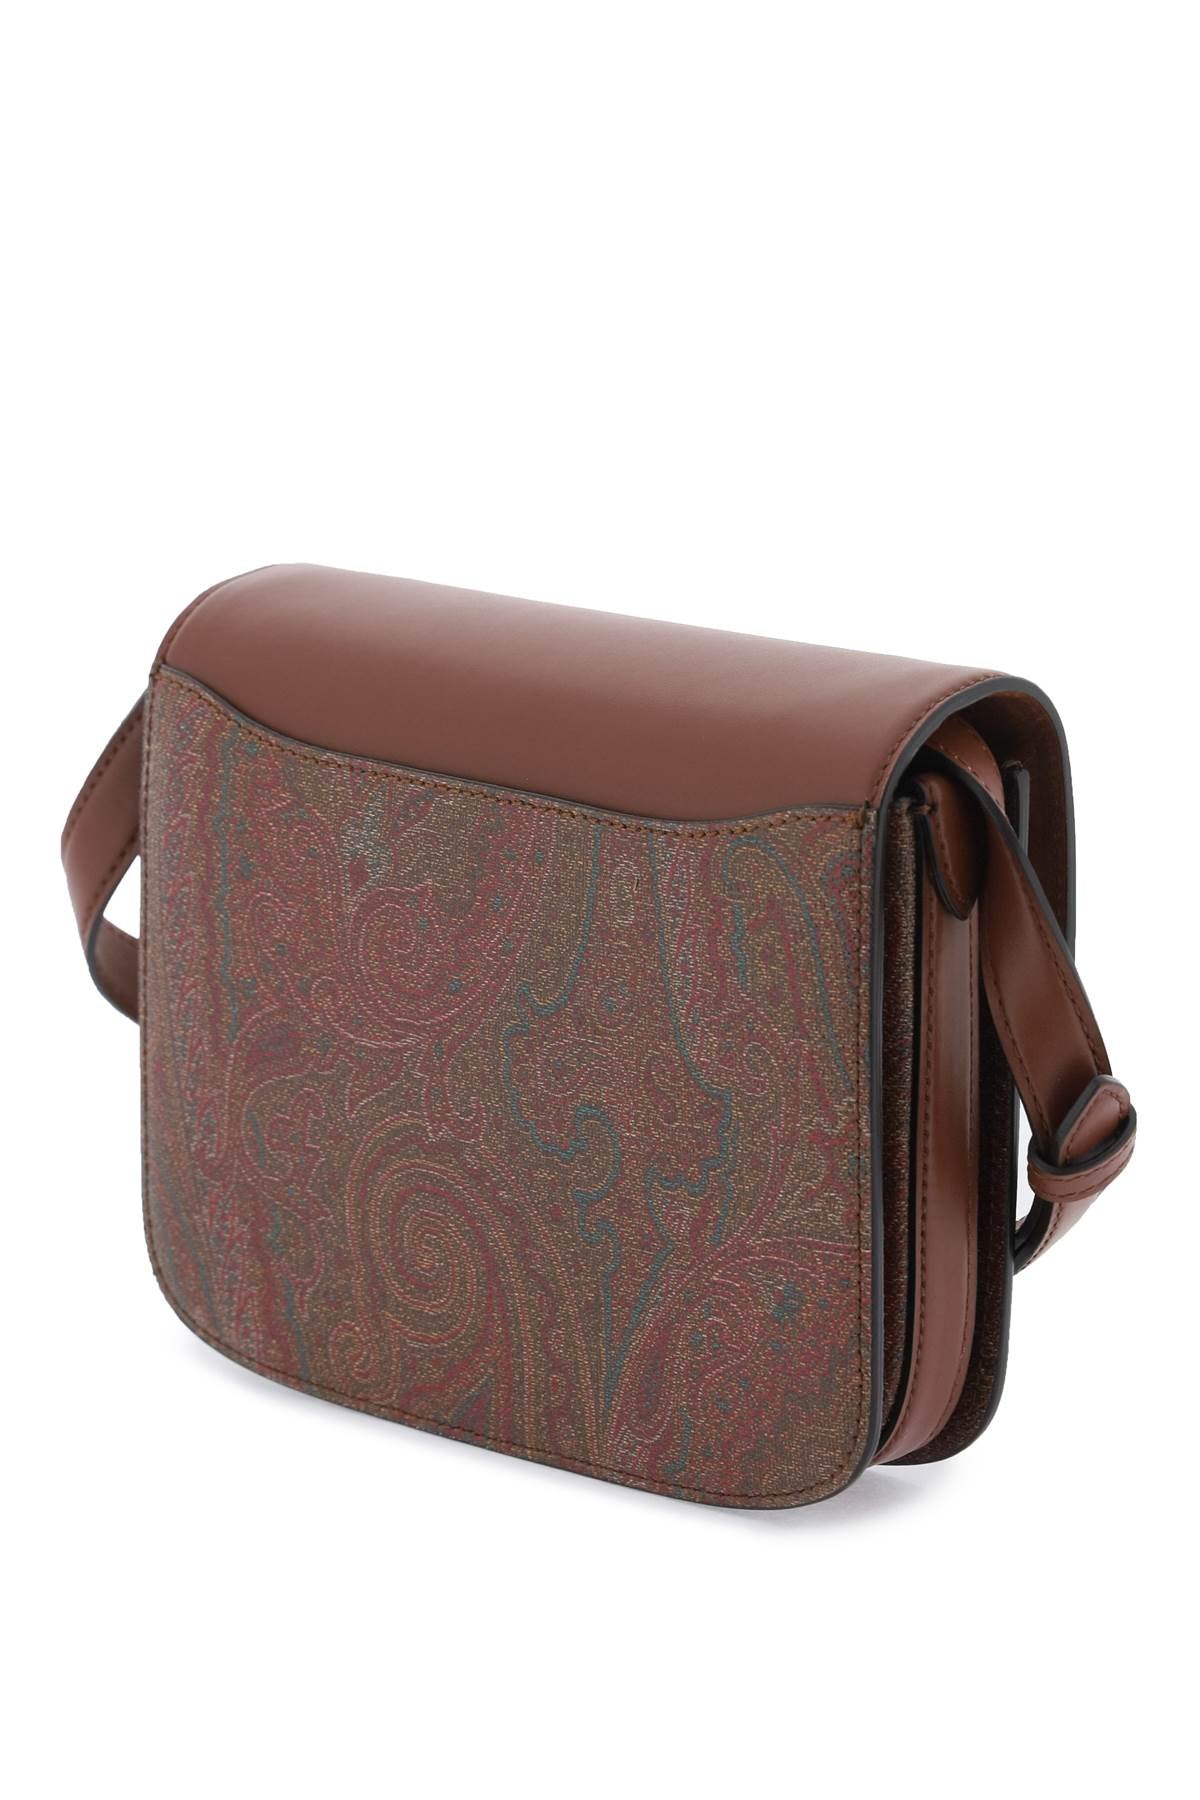 ETRO Essential Large Crossbody Canvas Handbag with Leather Flap and Paisley Motif